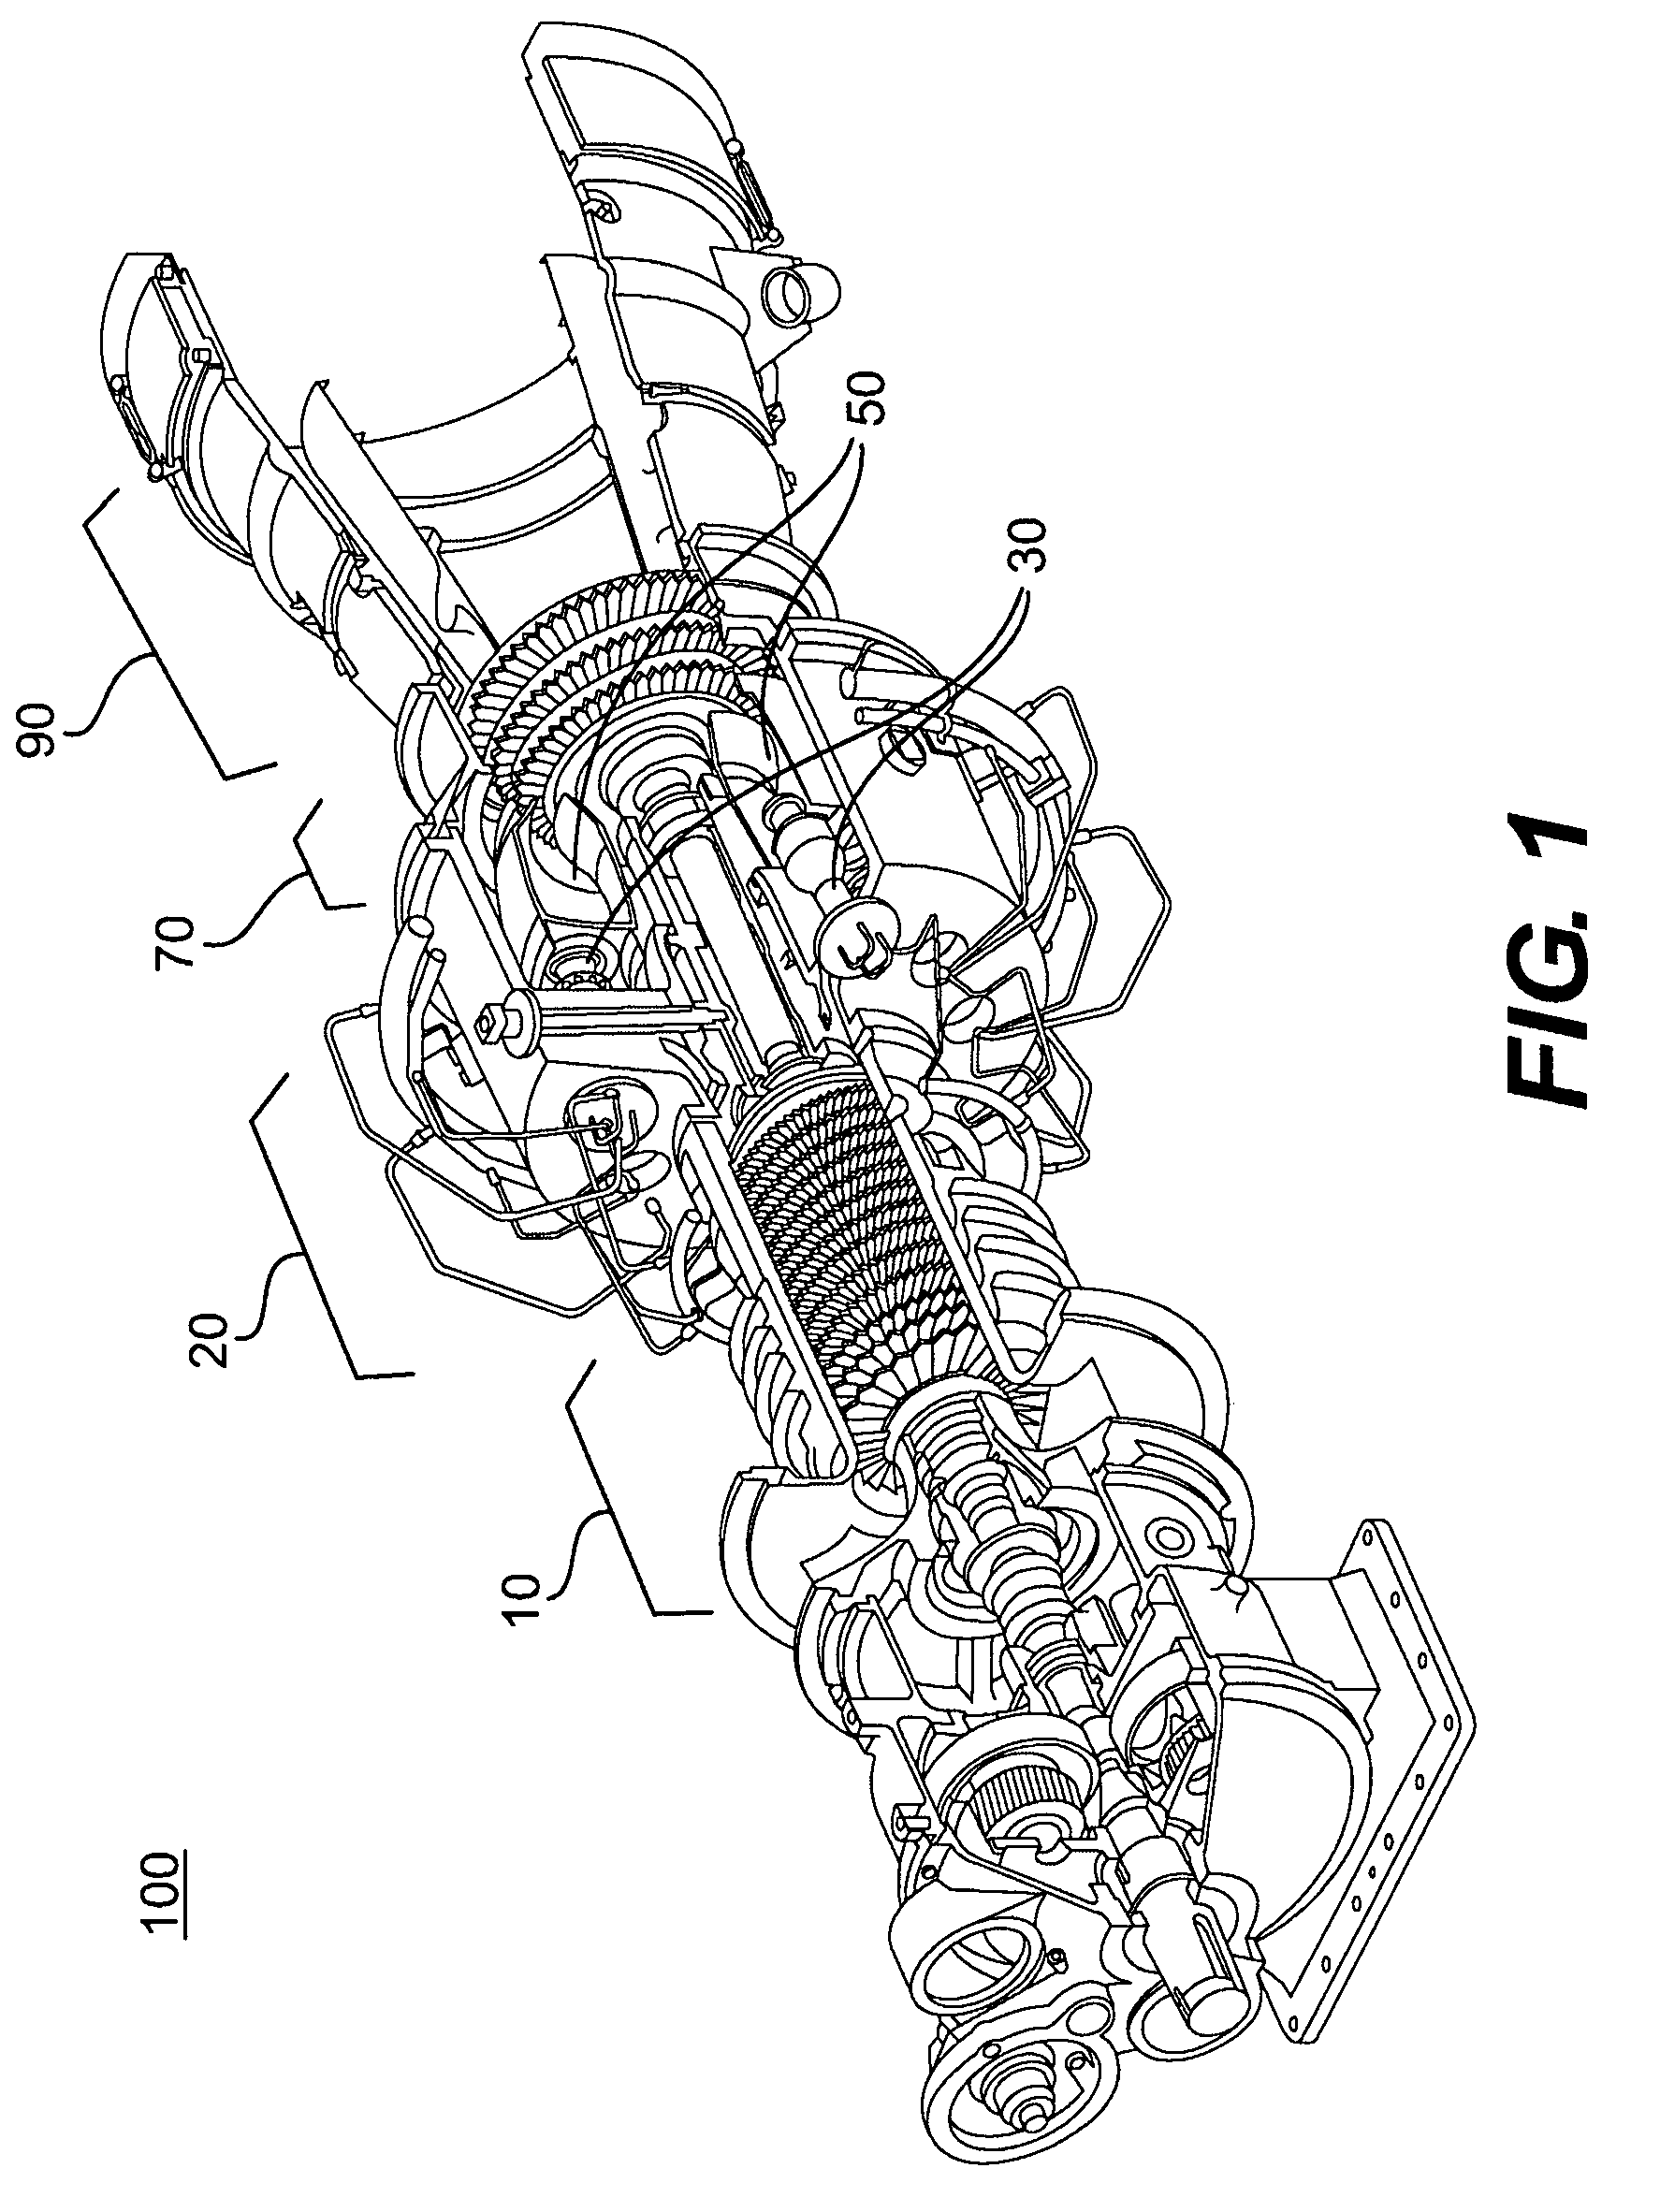 Active combustion control for a turbine engine